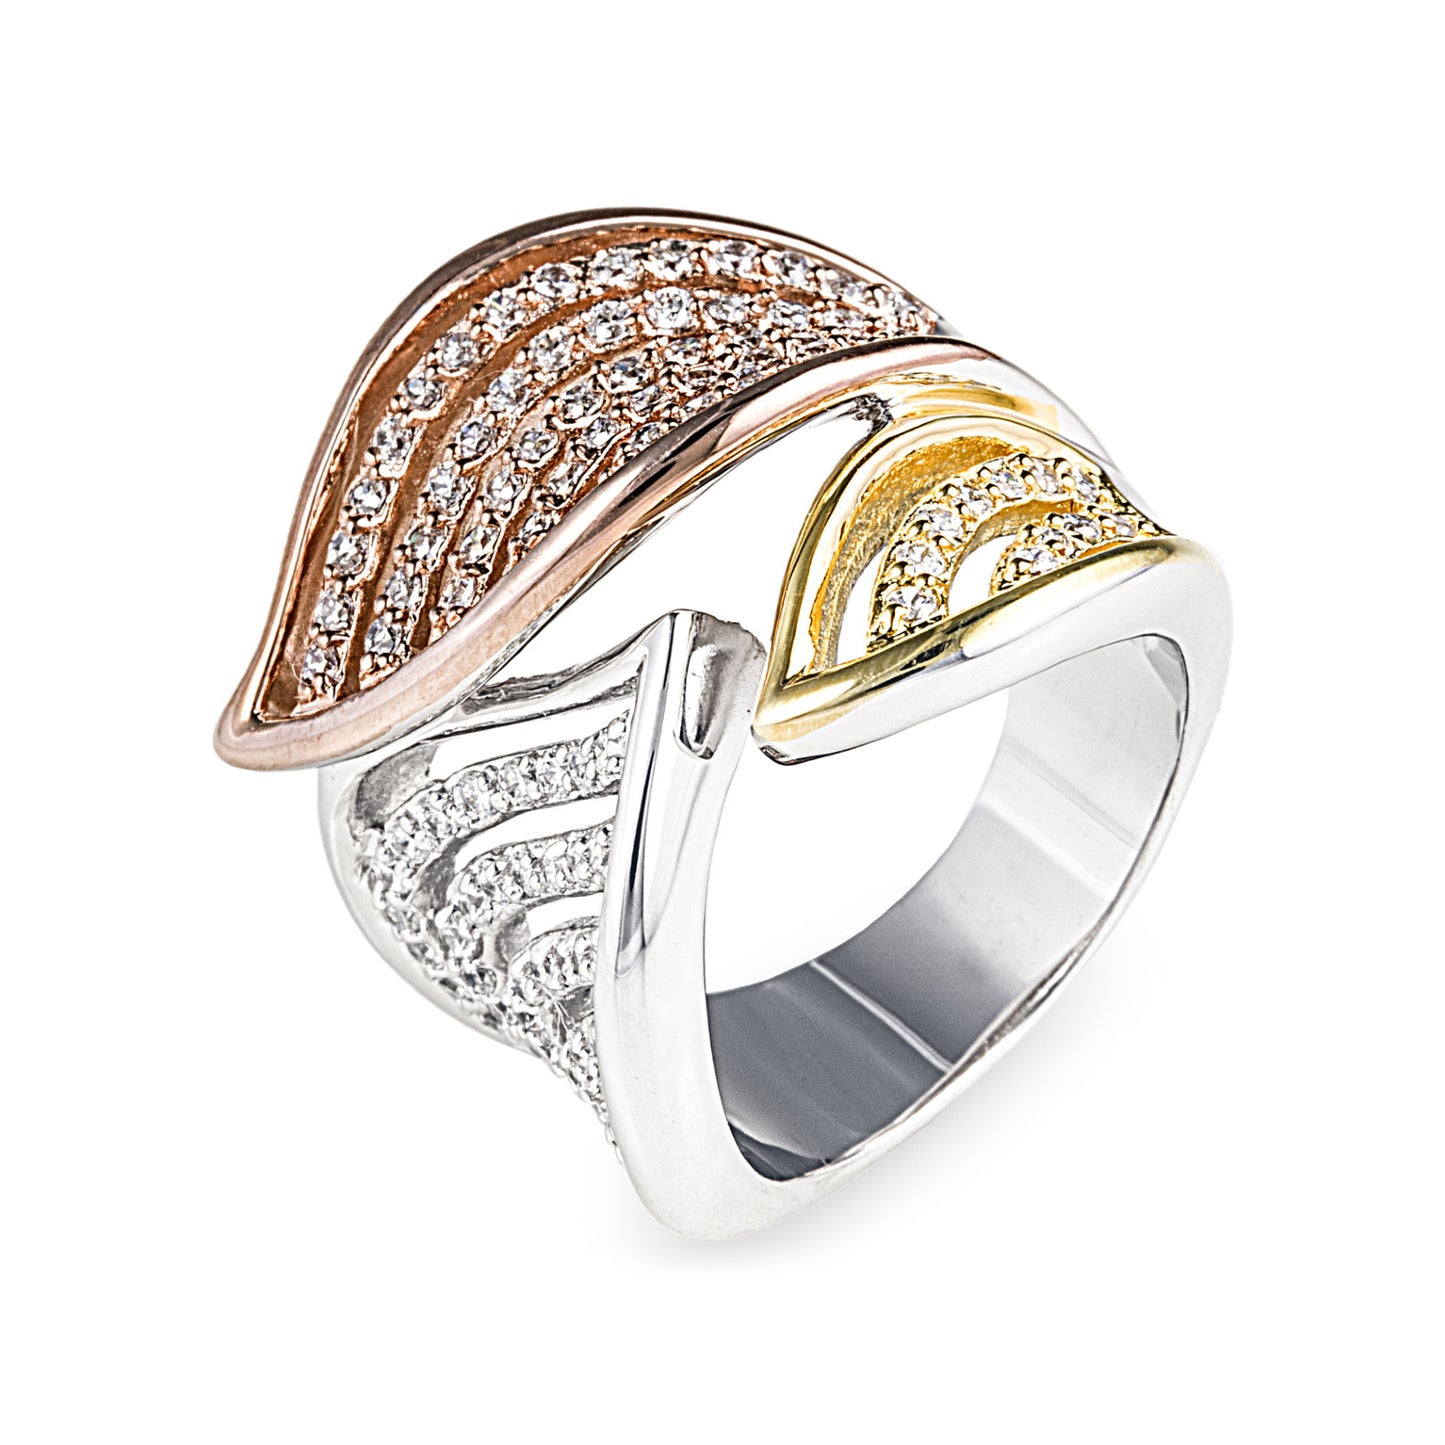 The Lake Como Ring is made of 925 Sterling Silver and features a rose gold and yellow gold leaf design which wraps around your finger. Encrusted with numerous tiny cubic zirconia stones to create a rich, glamorous and exotic look. Shop rings & affordable luxury jewellery by Bellagio & Co. Worldwide shipping